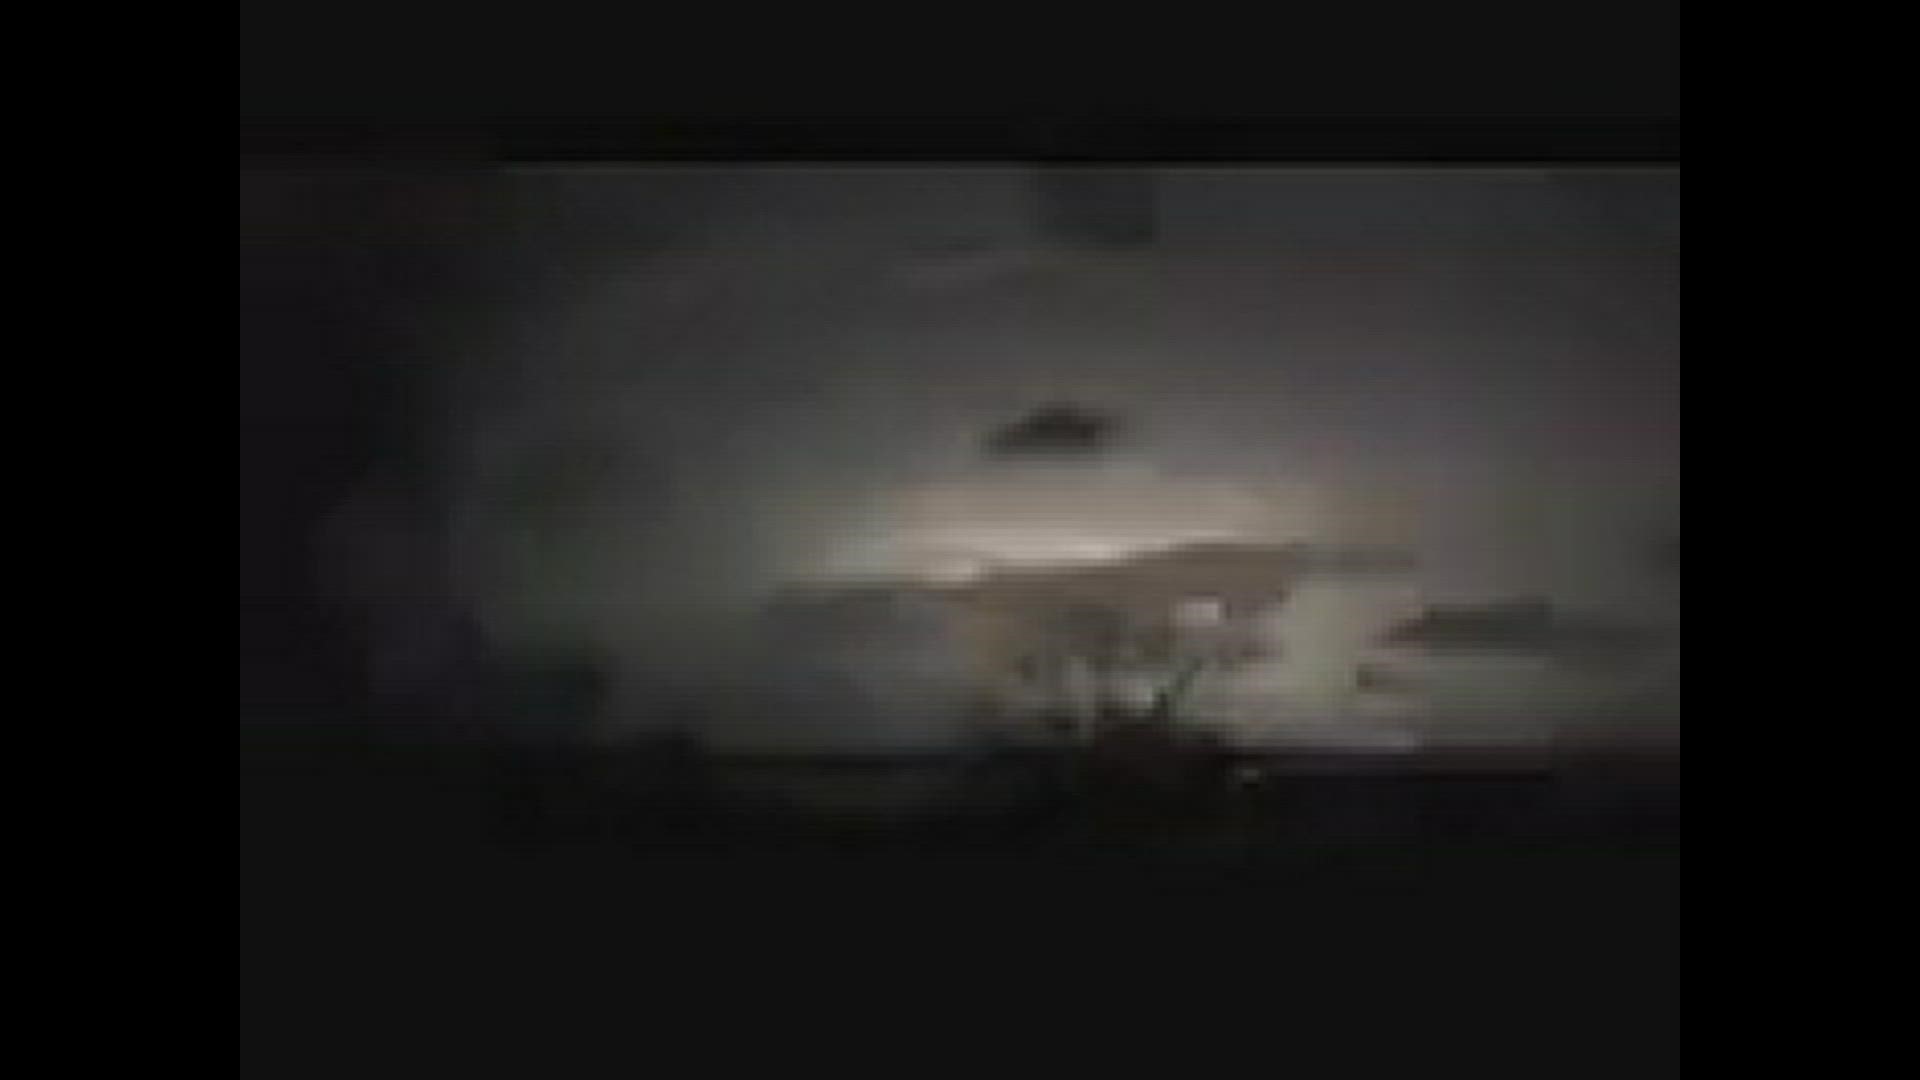 Upper vortex over Jonesboro area. Freeze frames for best impact. Video from Randolph,TN looking 20 miles NW more or less over the Mississippi River